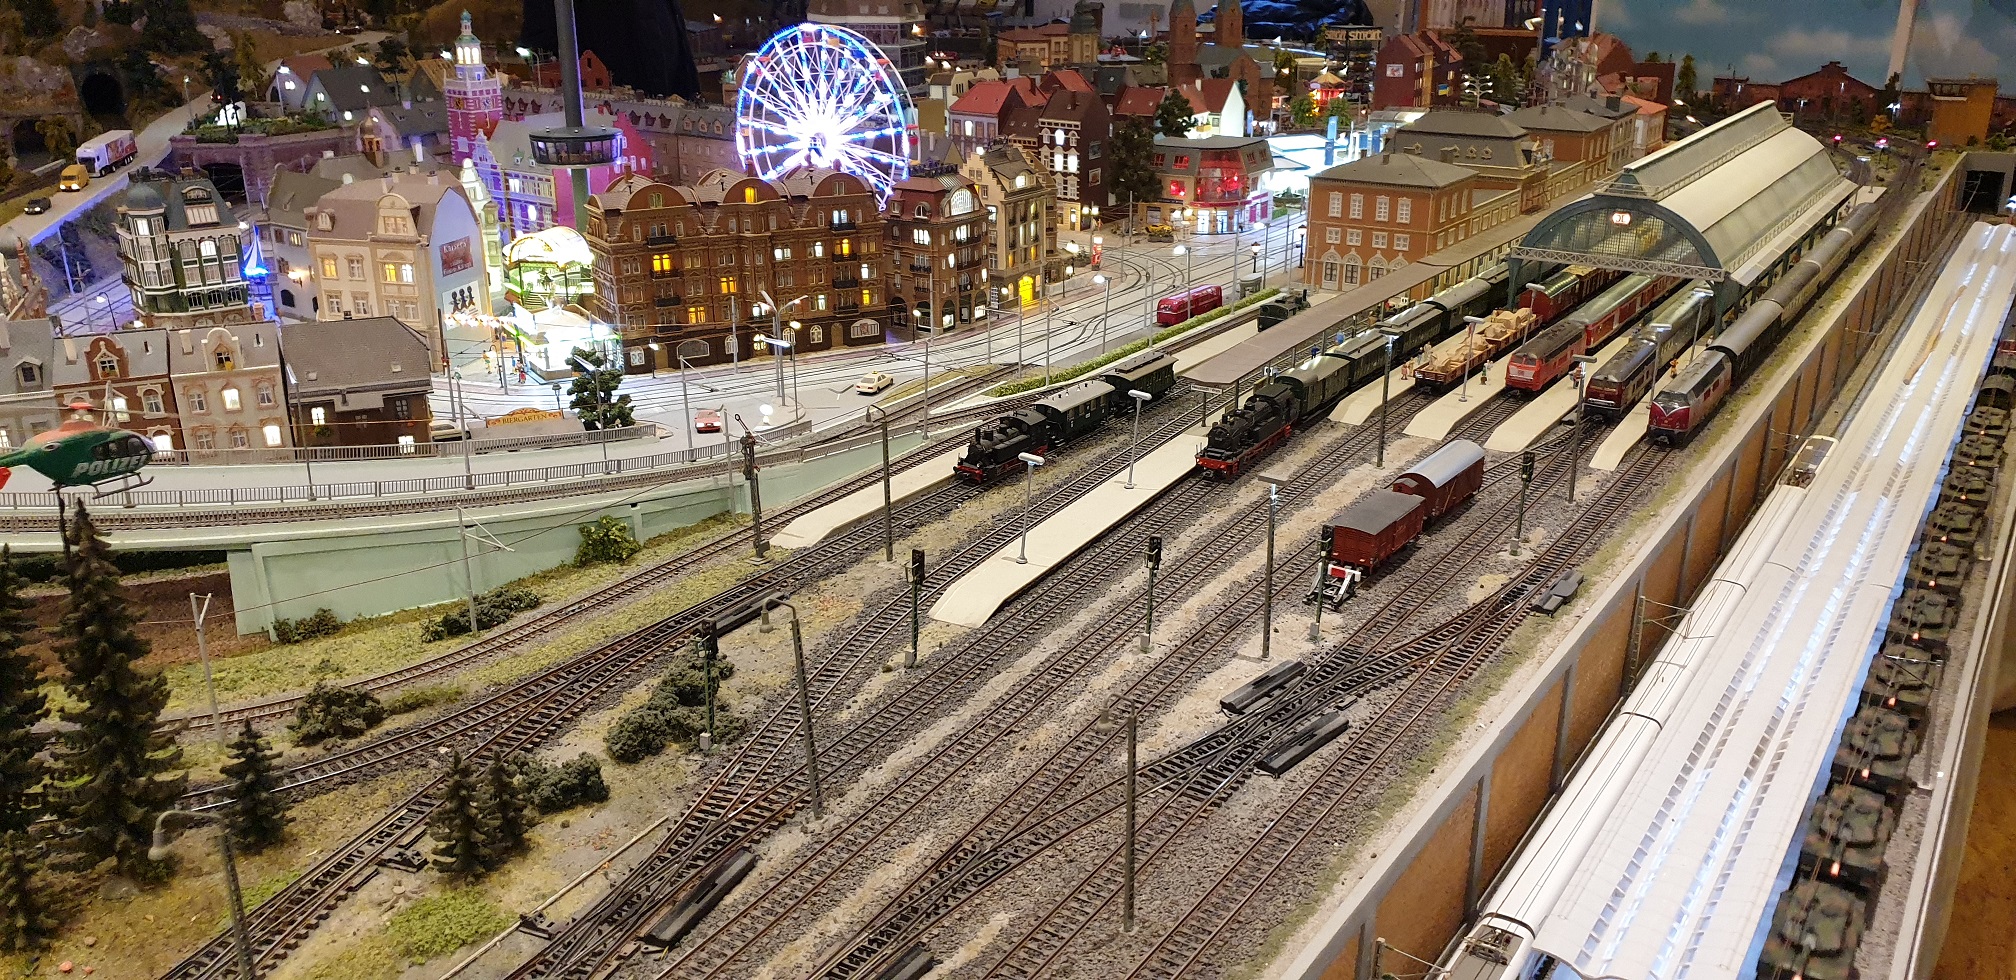 Picture of the Exhibtion Model Railroad Layout Obermoschel